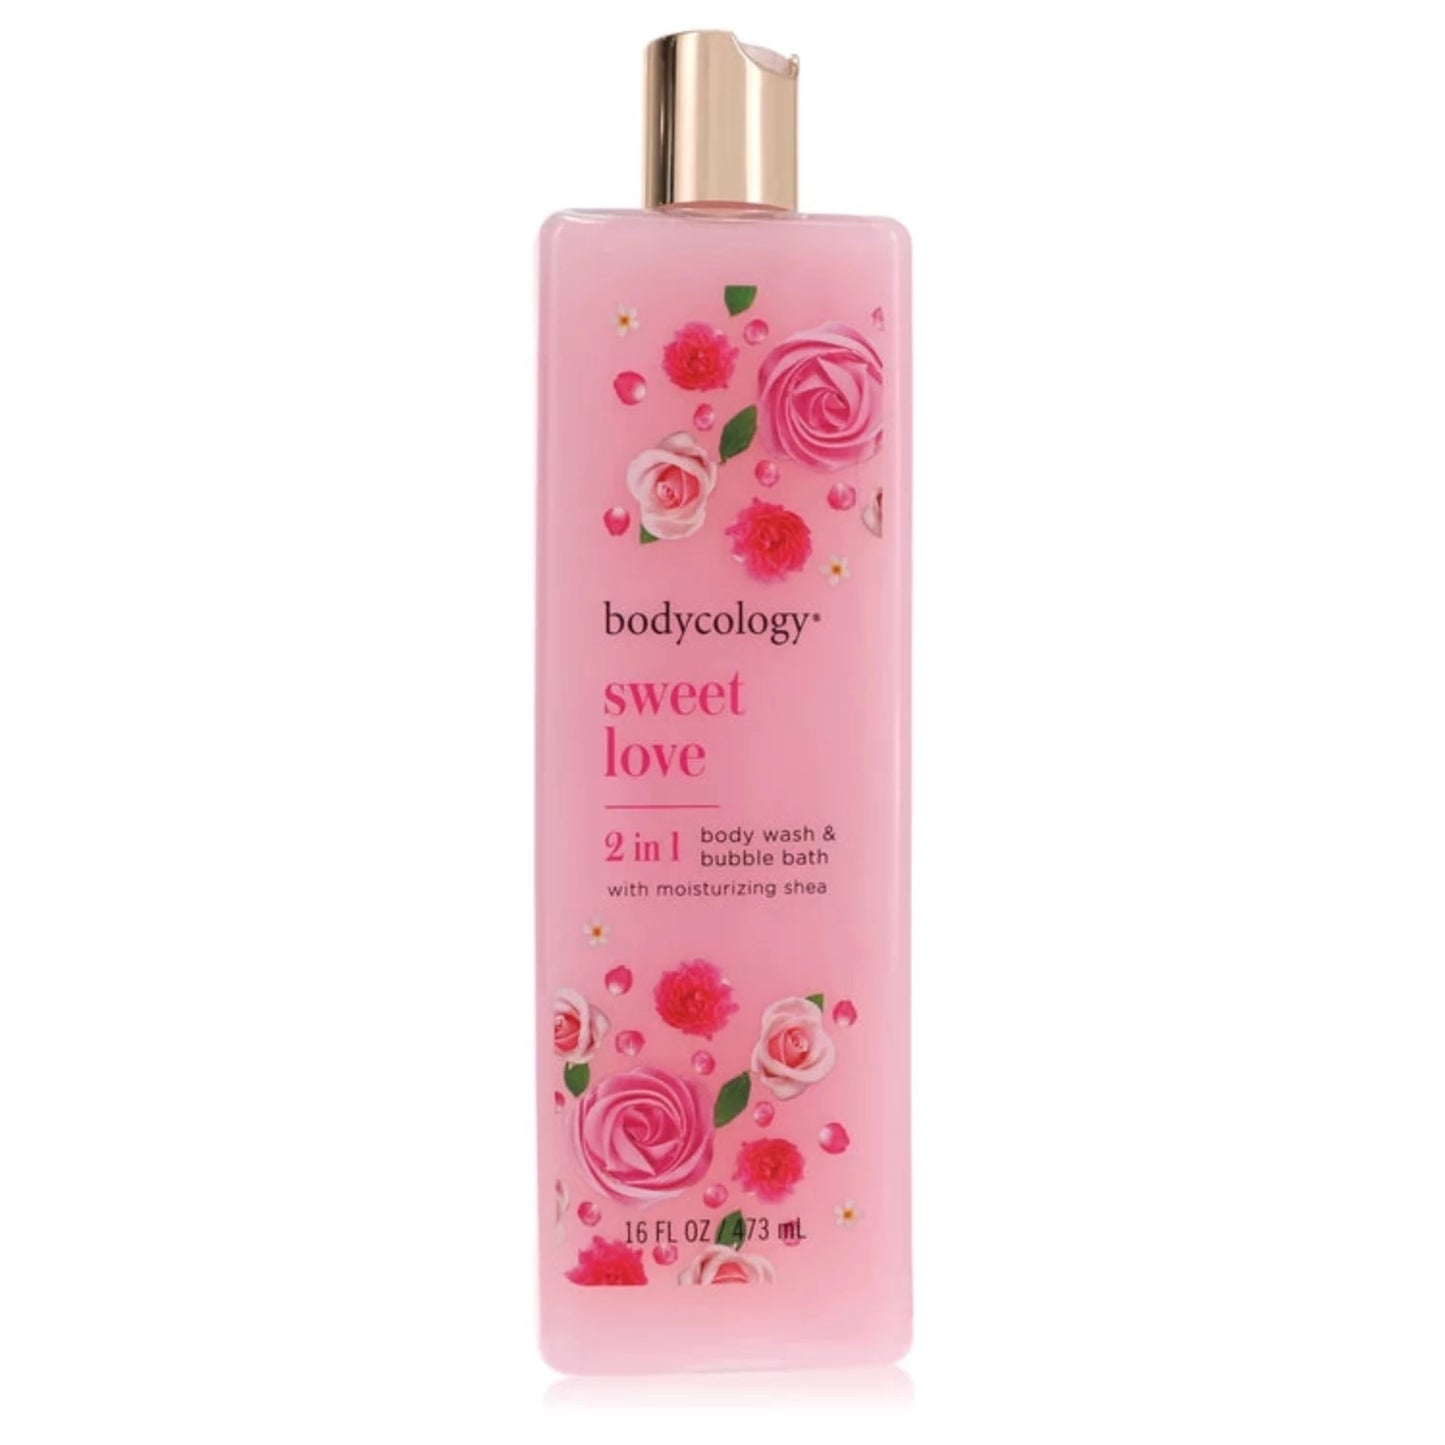 Bodycology Sweet Love Body Wash & Bubble Bath By Bodycology for women, Parfums De Coeur